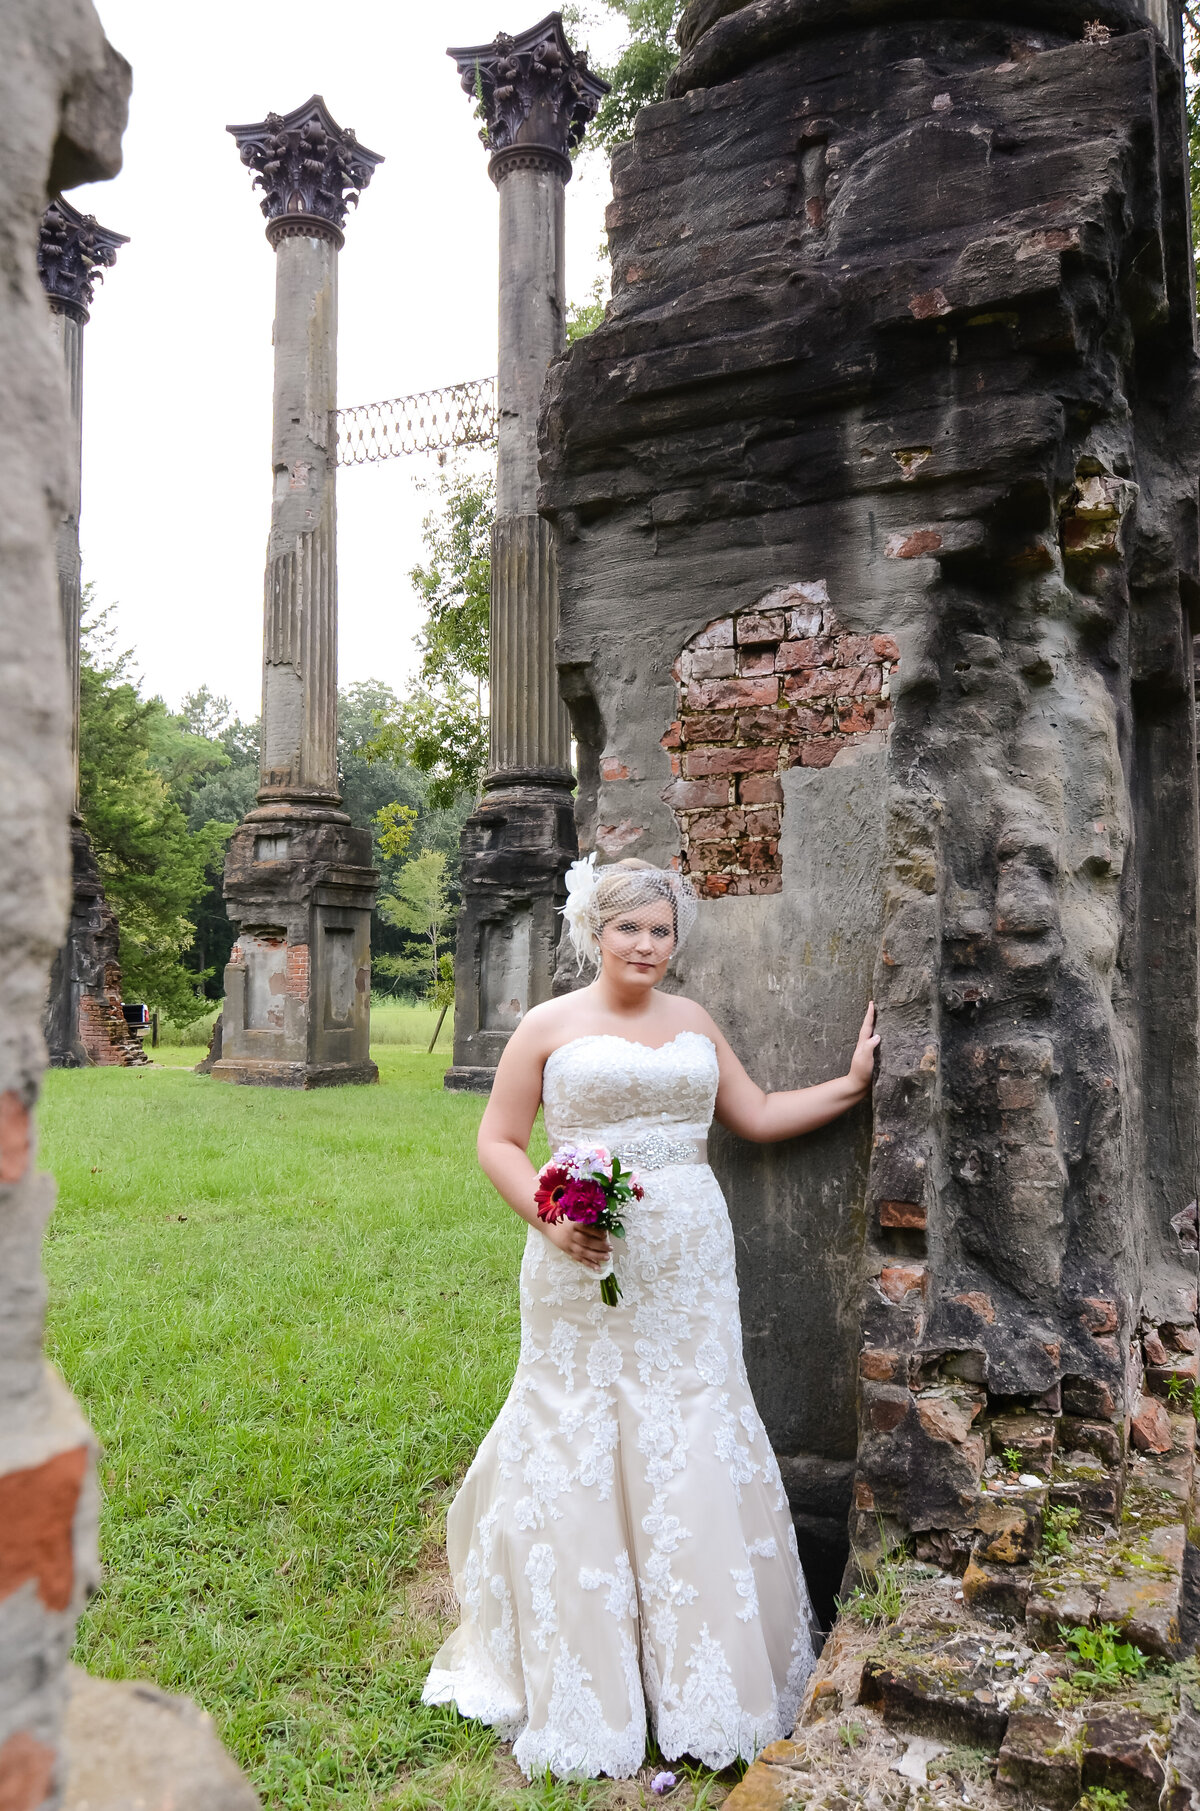 Beautiful bridal portrait photography: Bride with a birdcage veil stands among the ruins at Windsor plantation in MS